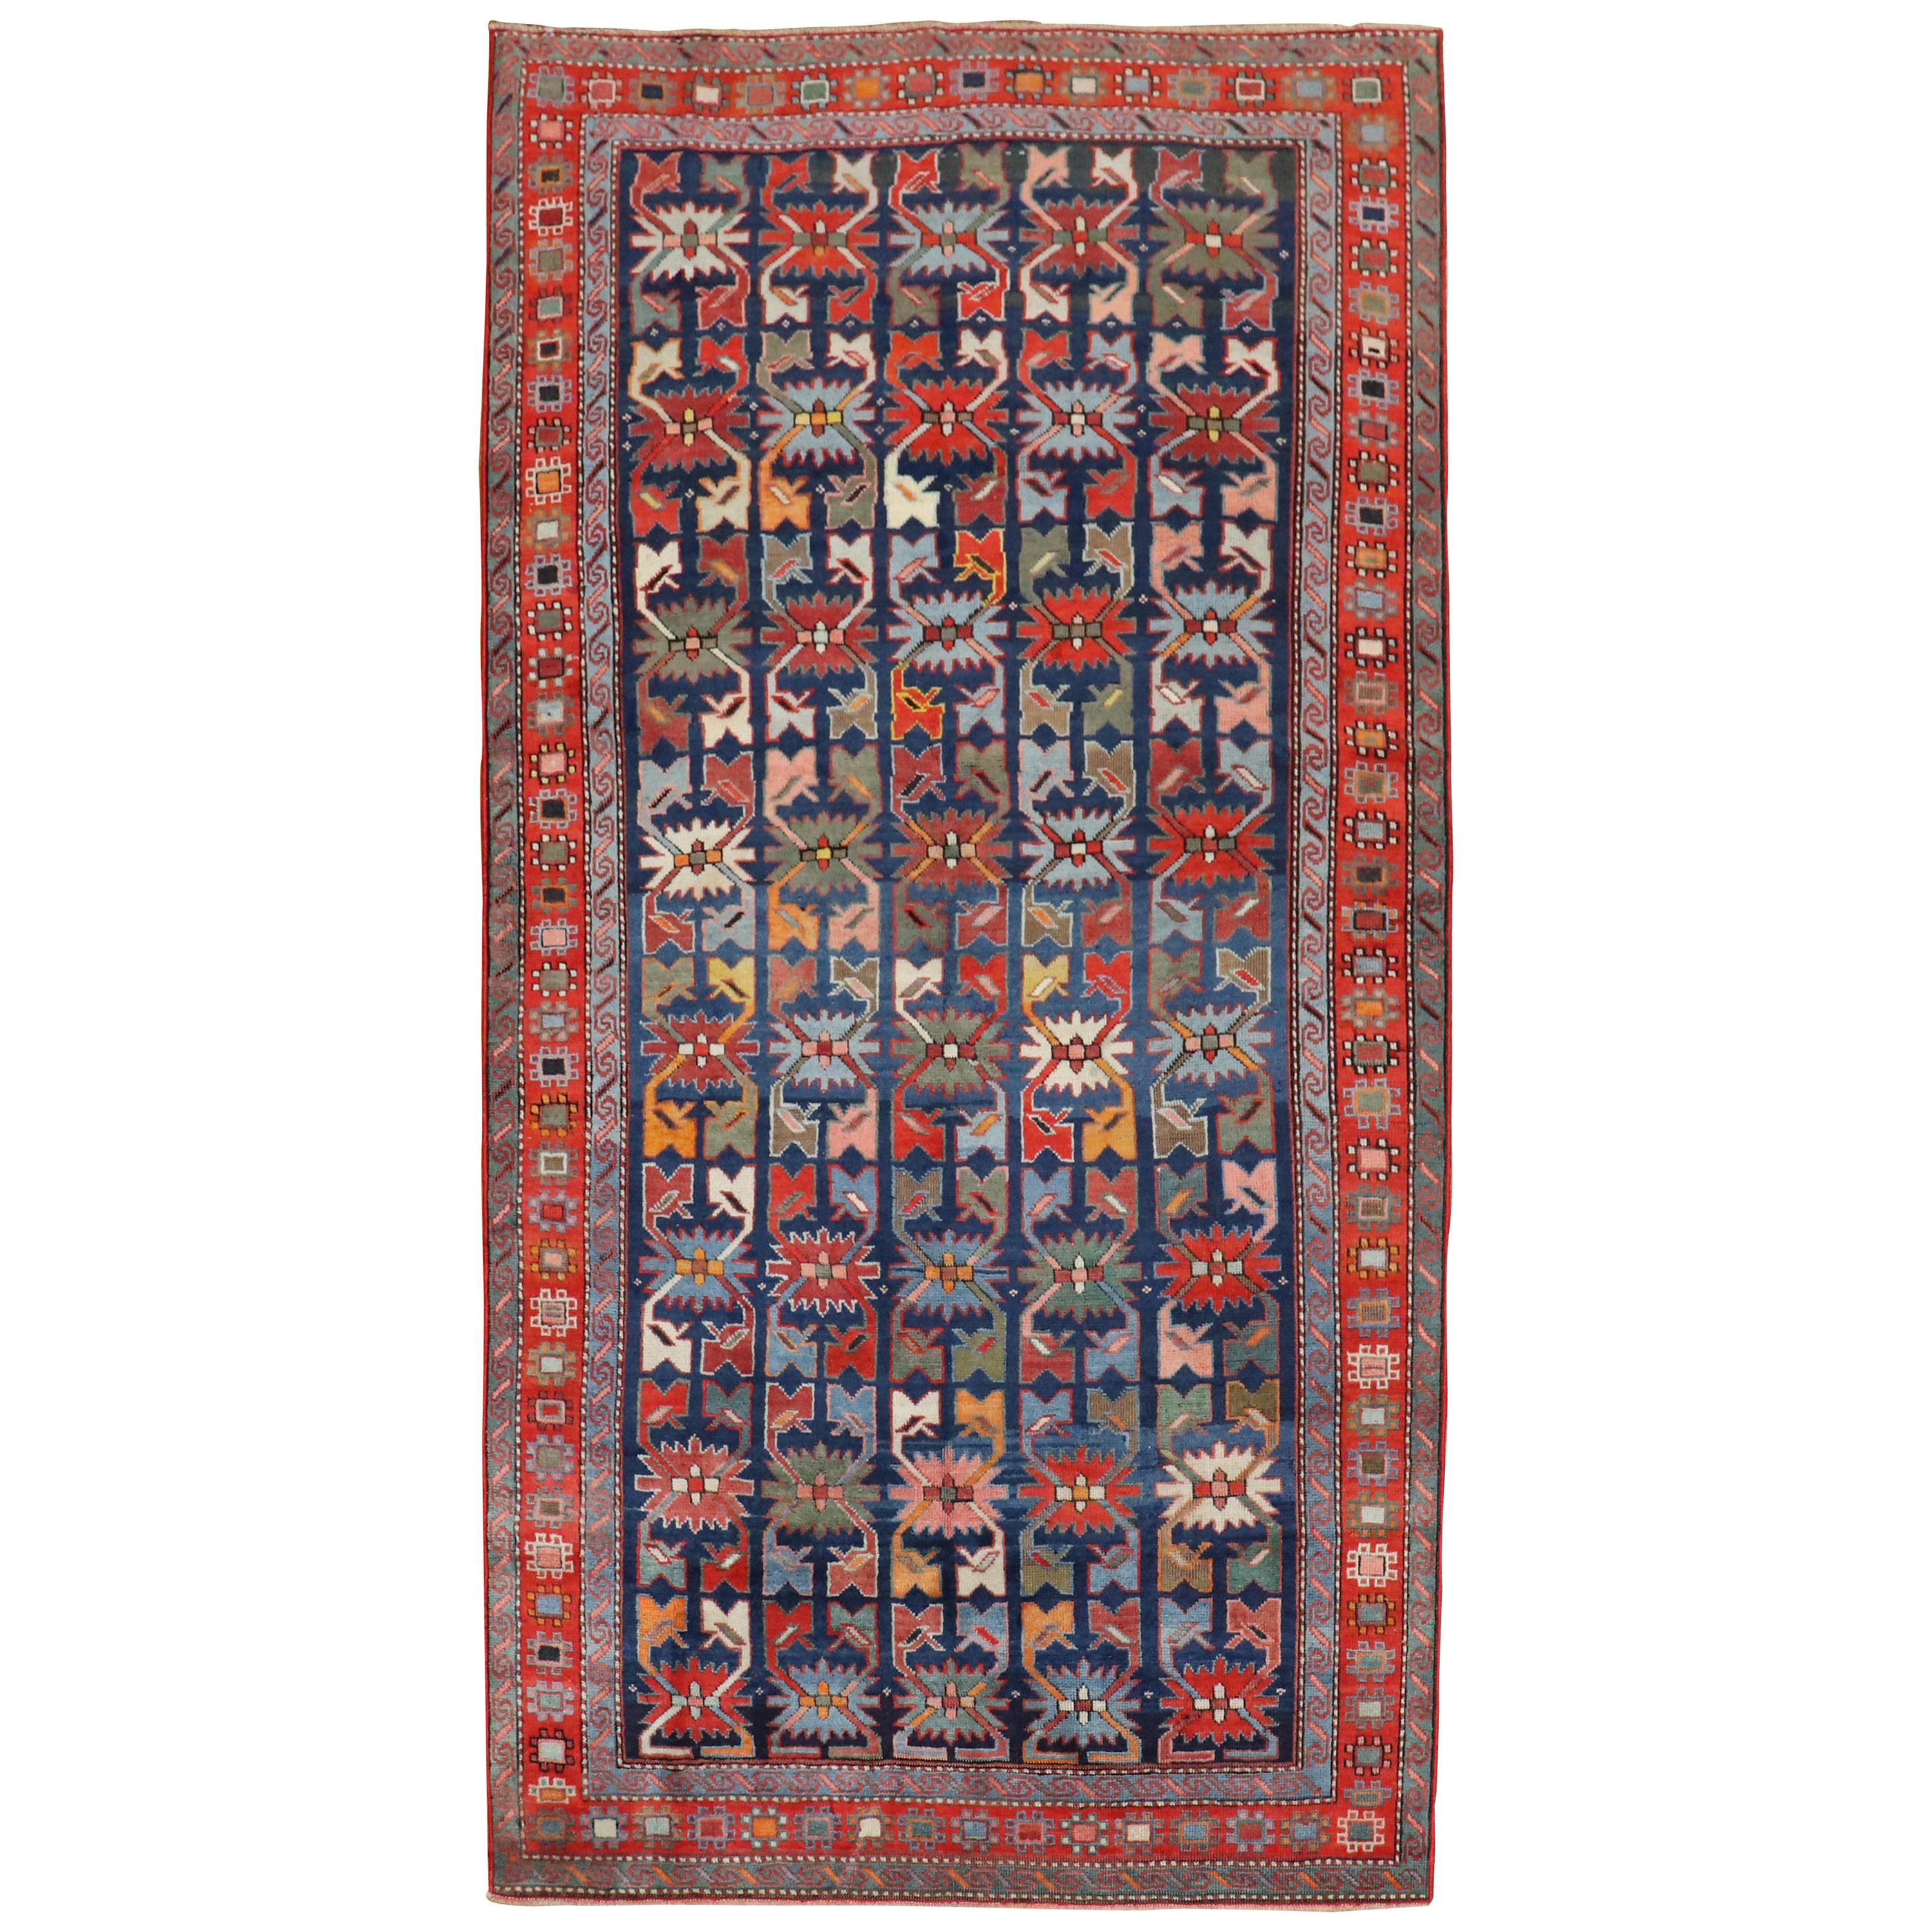 Colorful Early 20th Century Antique Karabagh Caucasian Rug